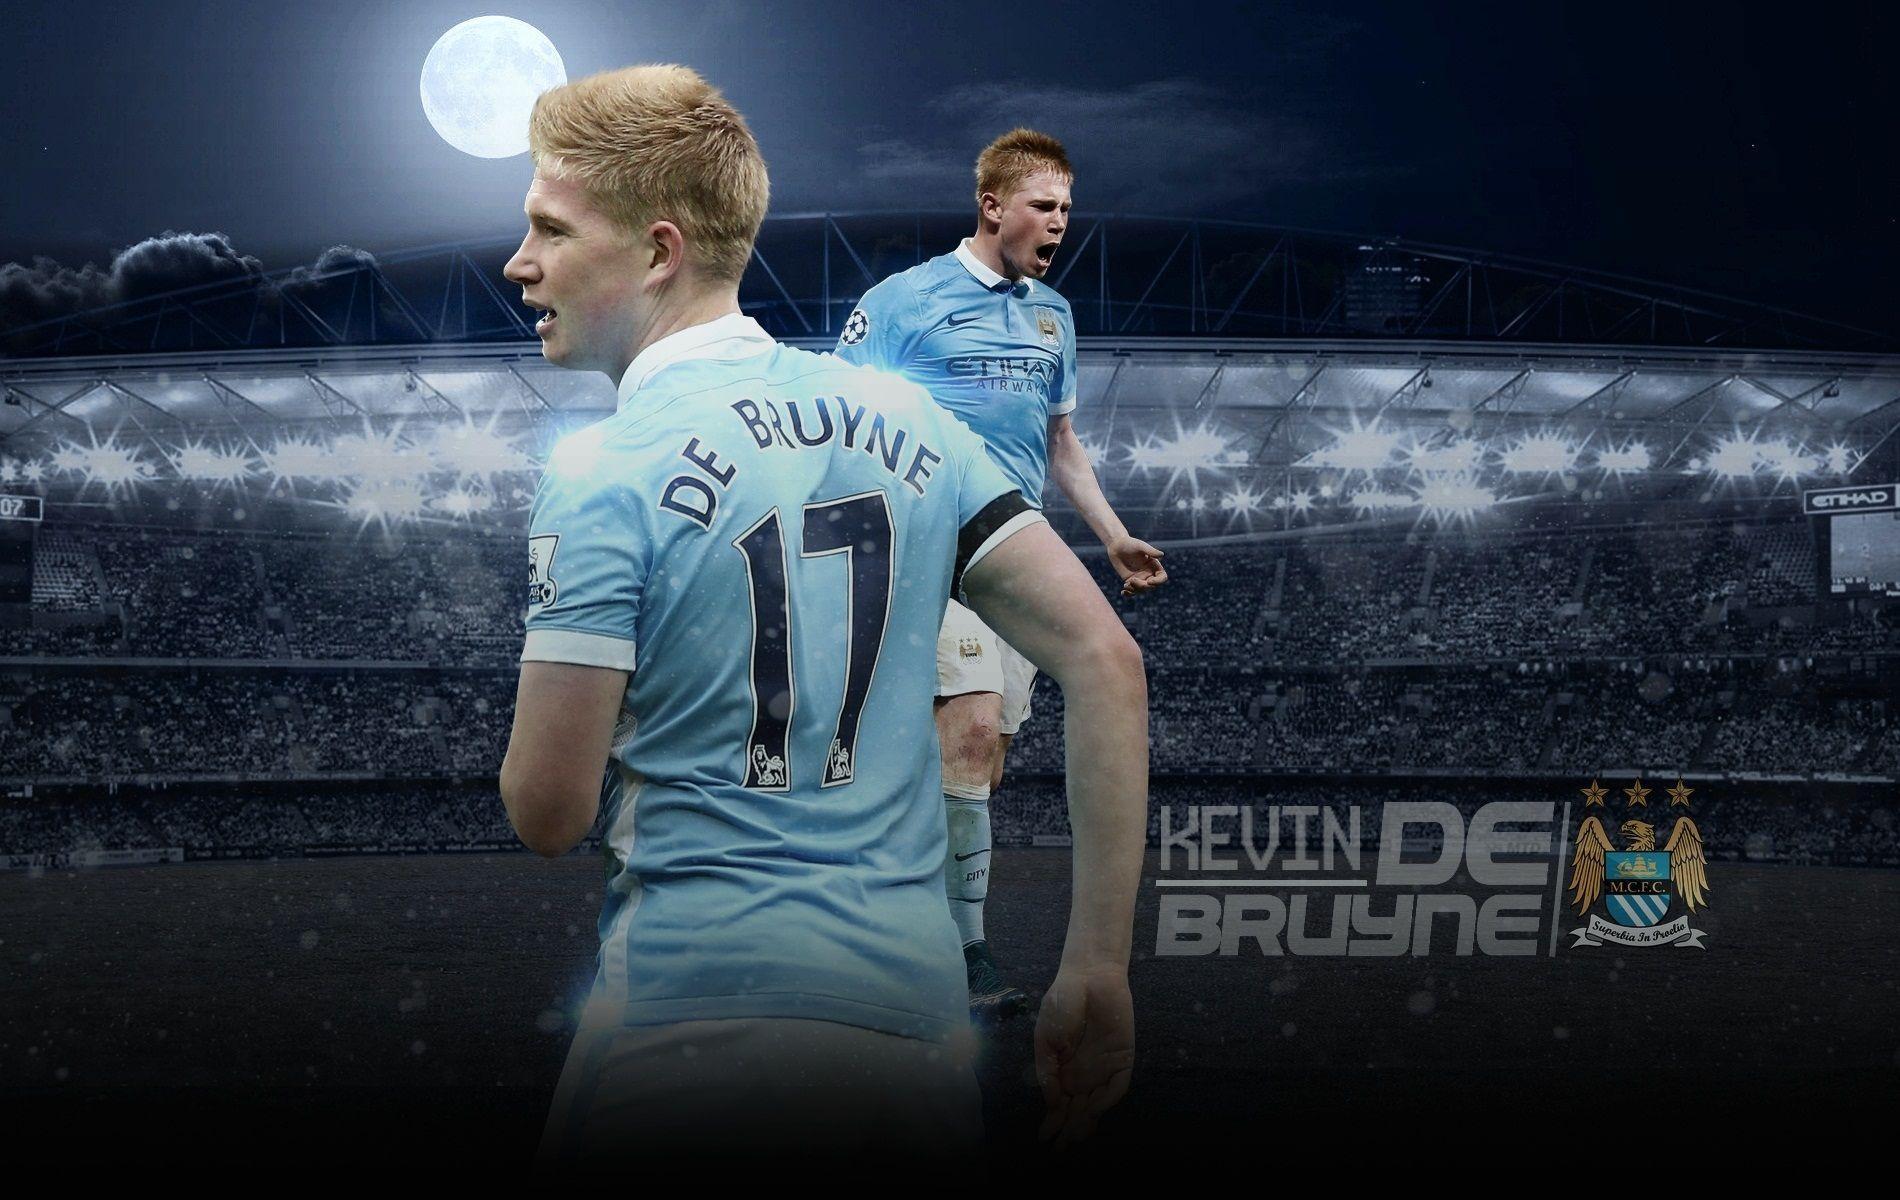 Kevin De Bruyne Wallpaper Wallpaper Background of Your Choice